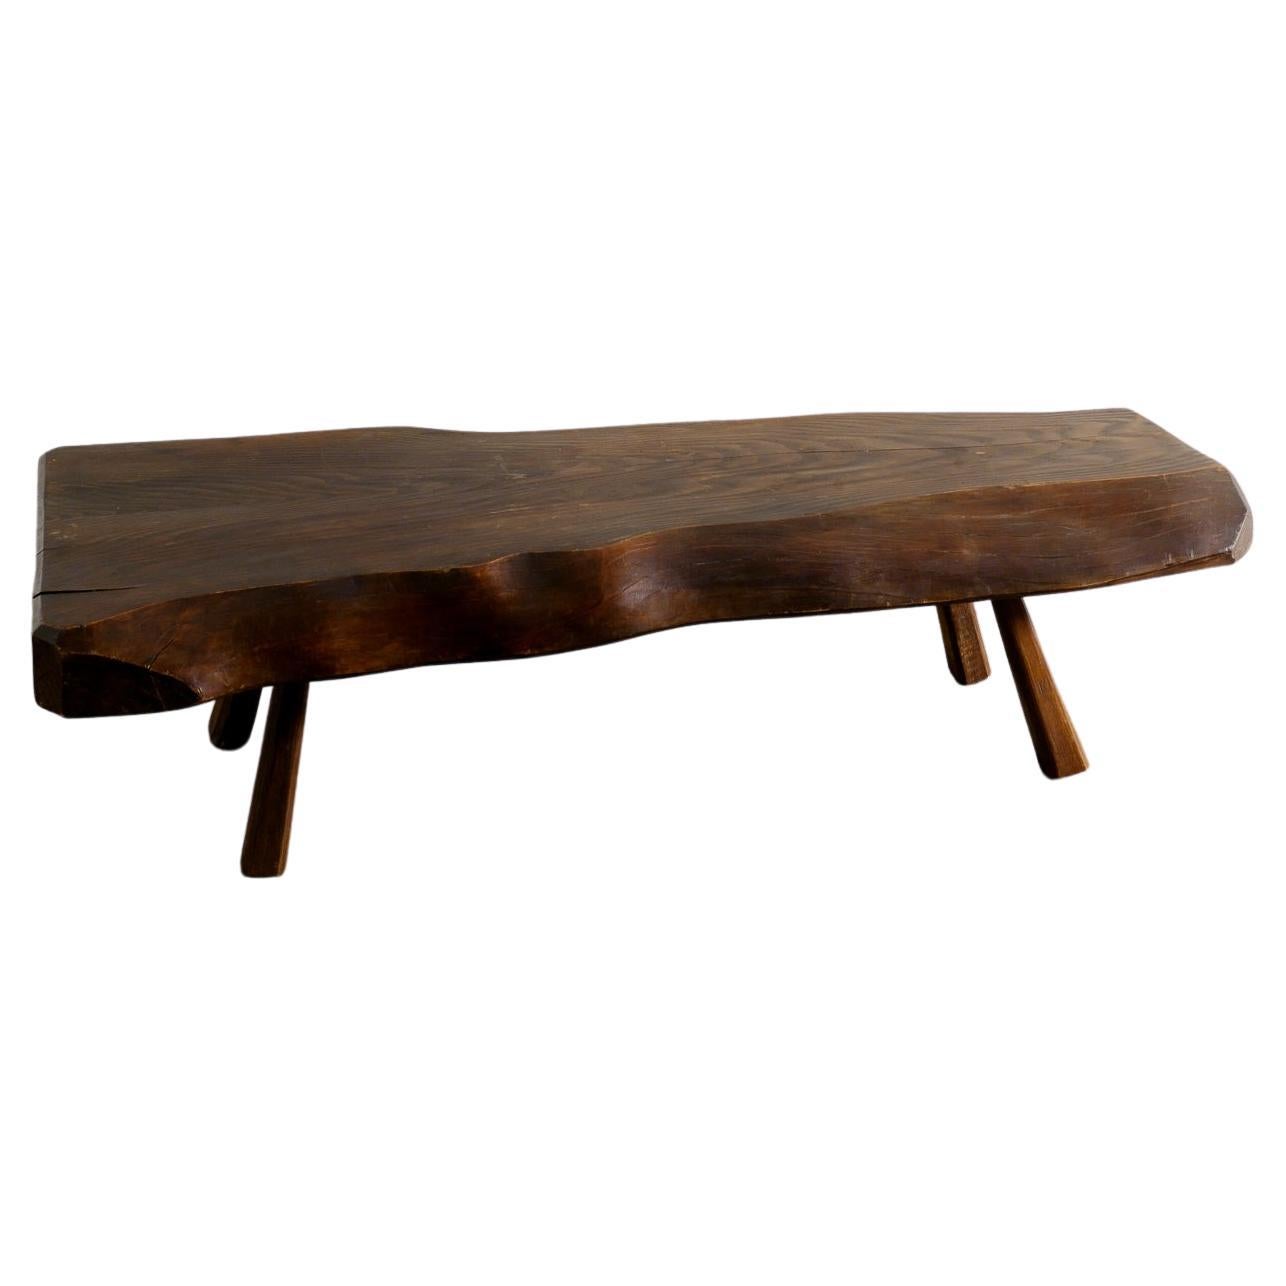 French Midcentury Wooden Coffee Sofa Table in a Brutalist Freeform Style, 1960s